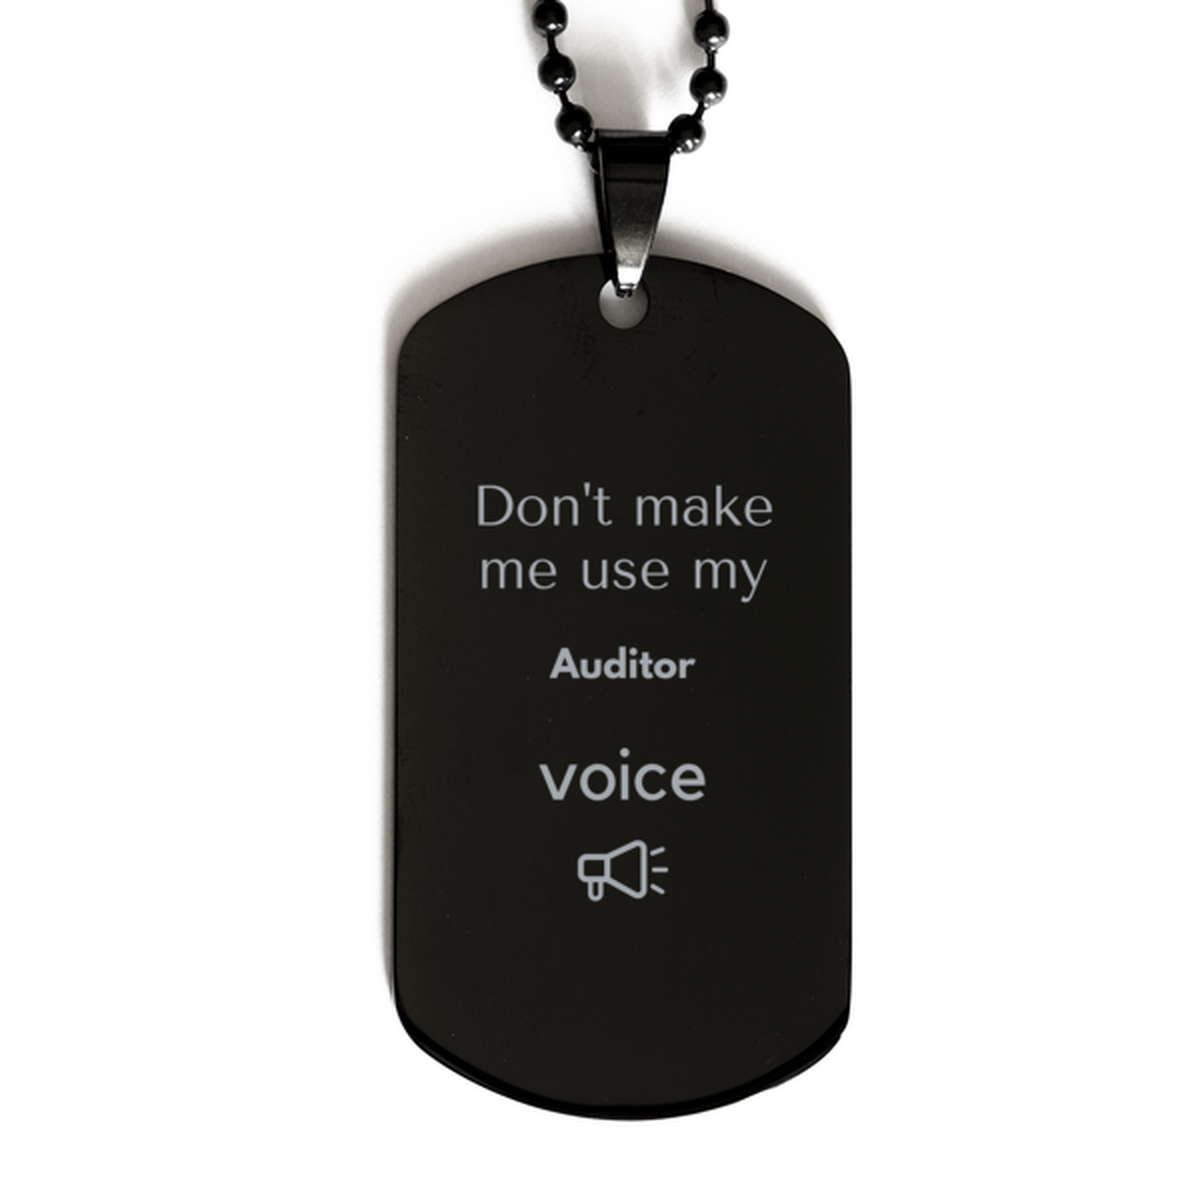 Don't make me use my Auditor voice, Sarcasm Auditor Gifts, Christmas Auditor Black Dog Tag Birthday Unique Gifts For Auditor Coworkers, Men, Women, Colleague, Friends